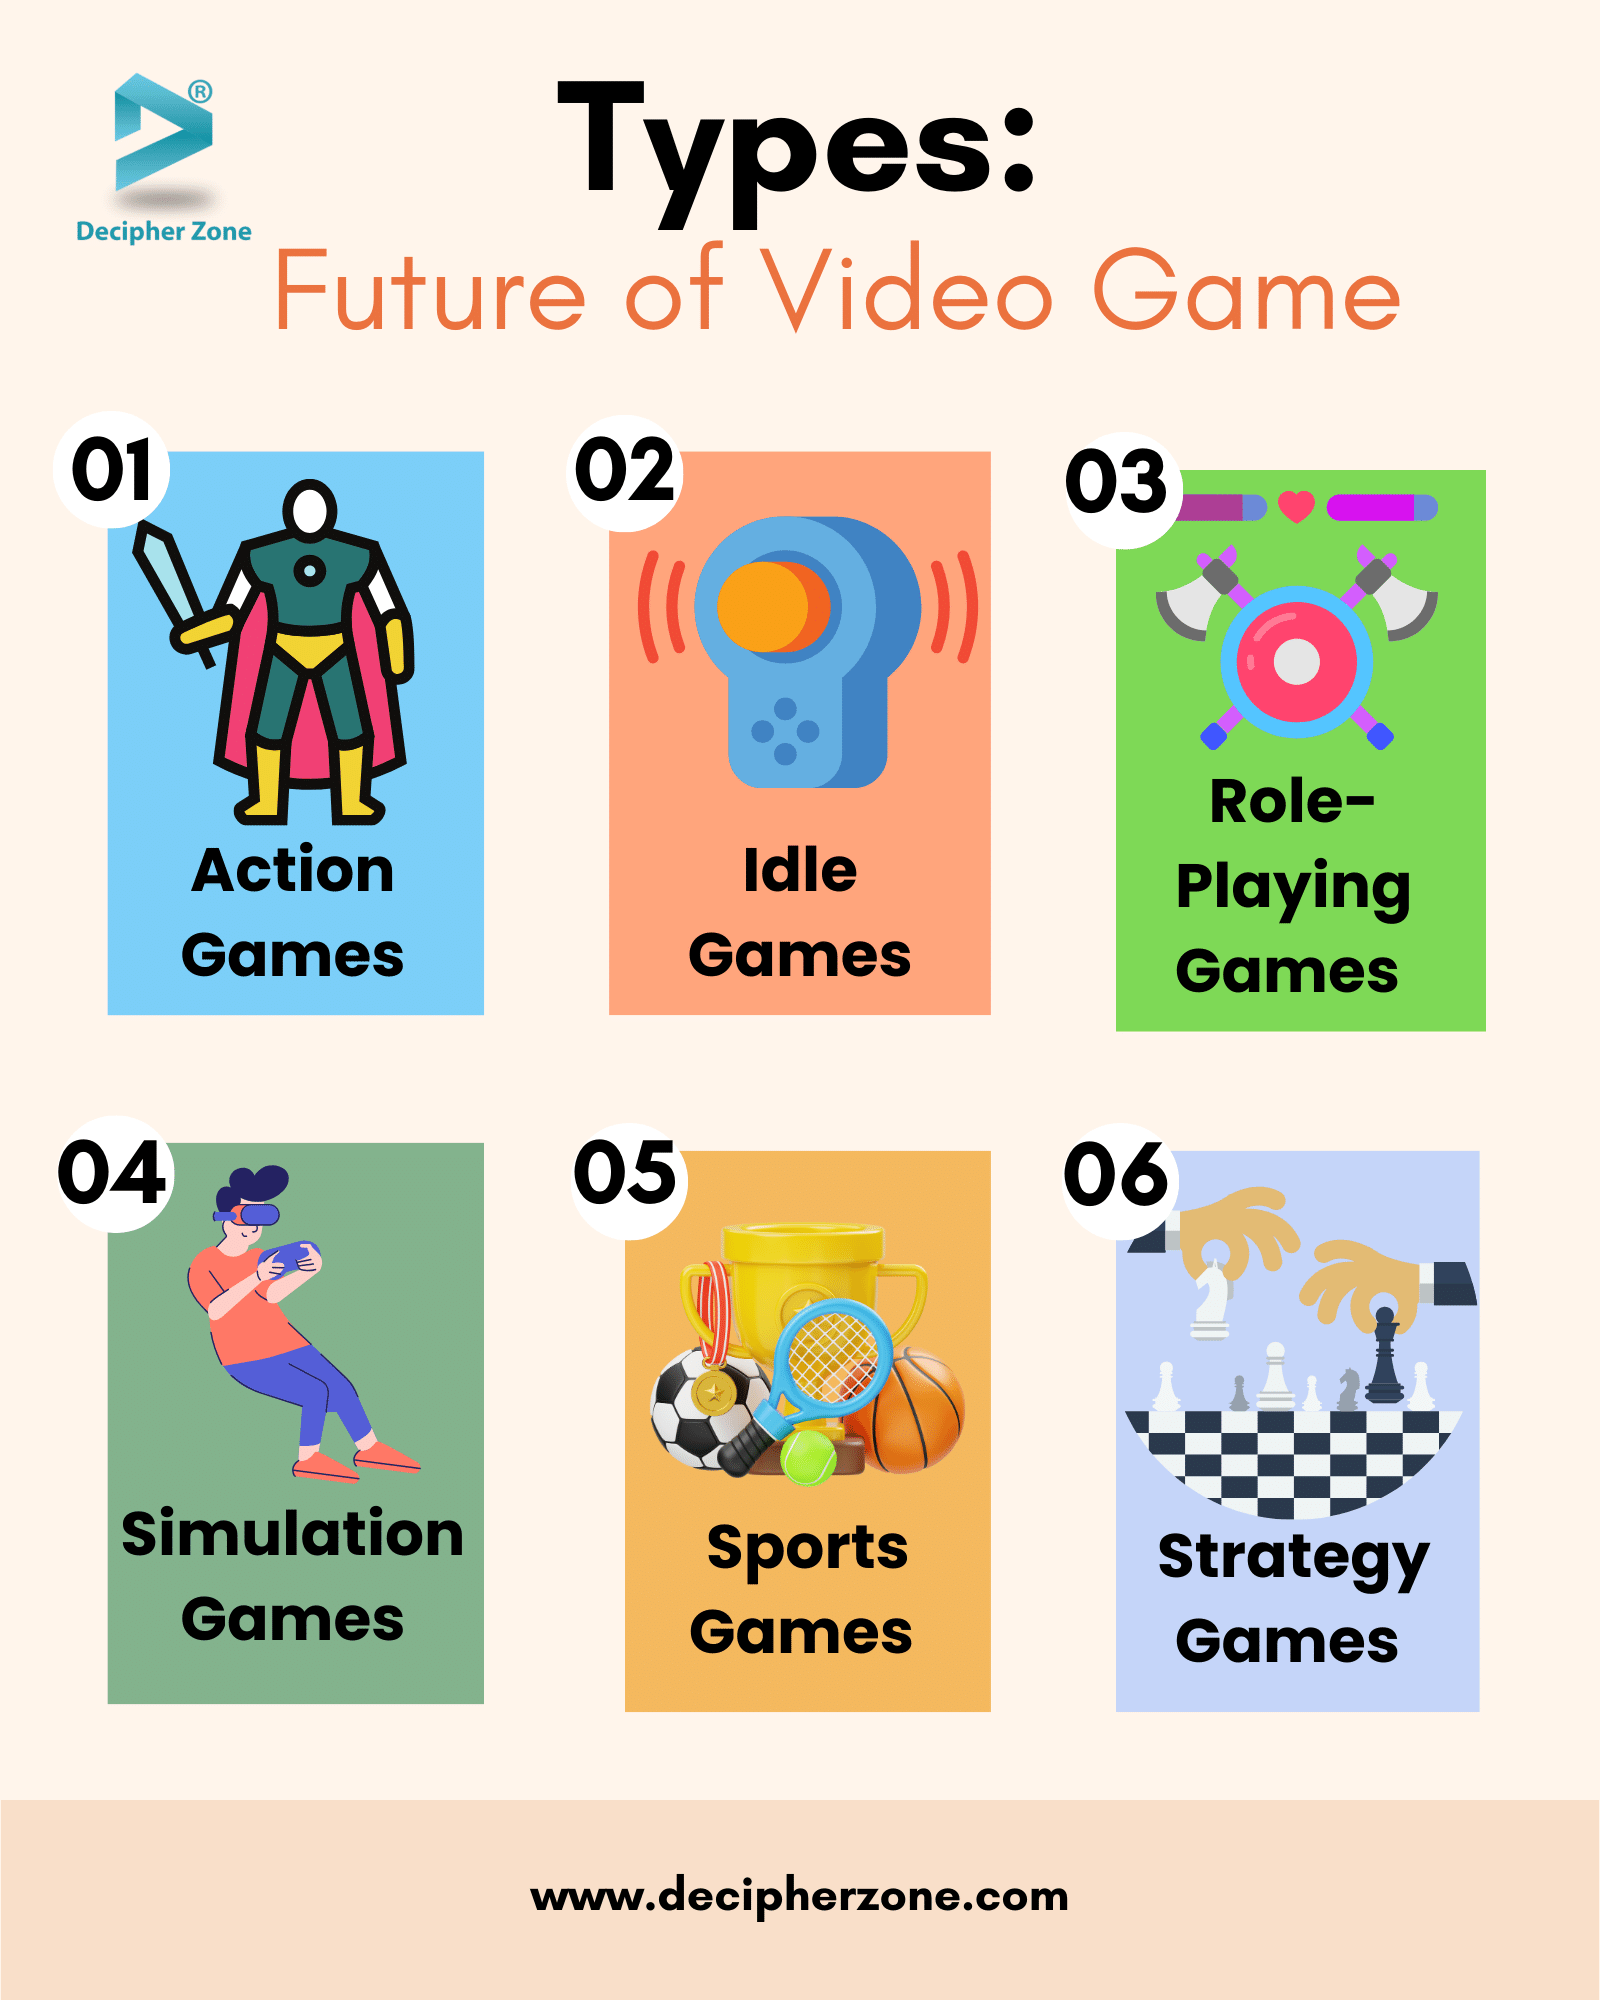 The Future of Video Games